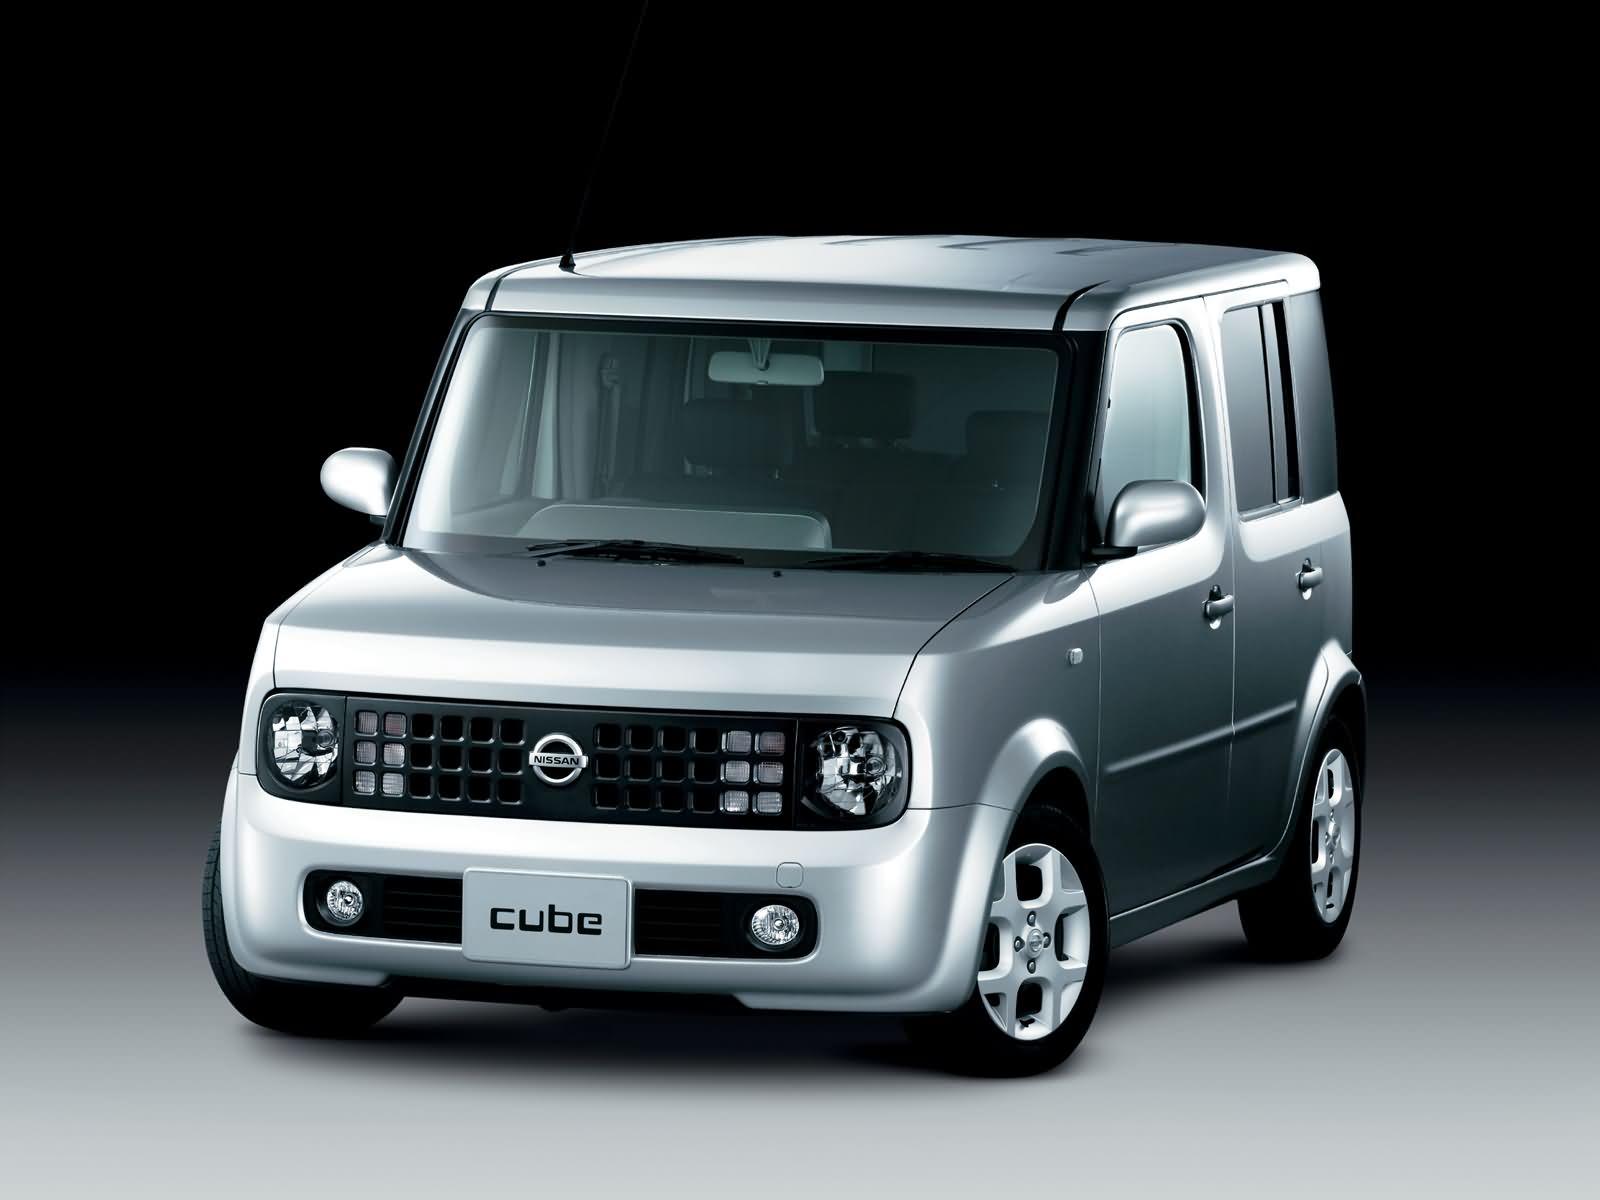 Nissan Cube picture. Nissan photo gallery